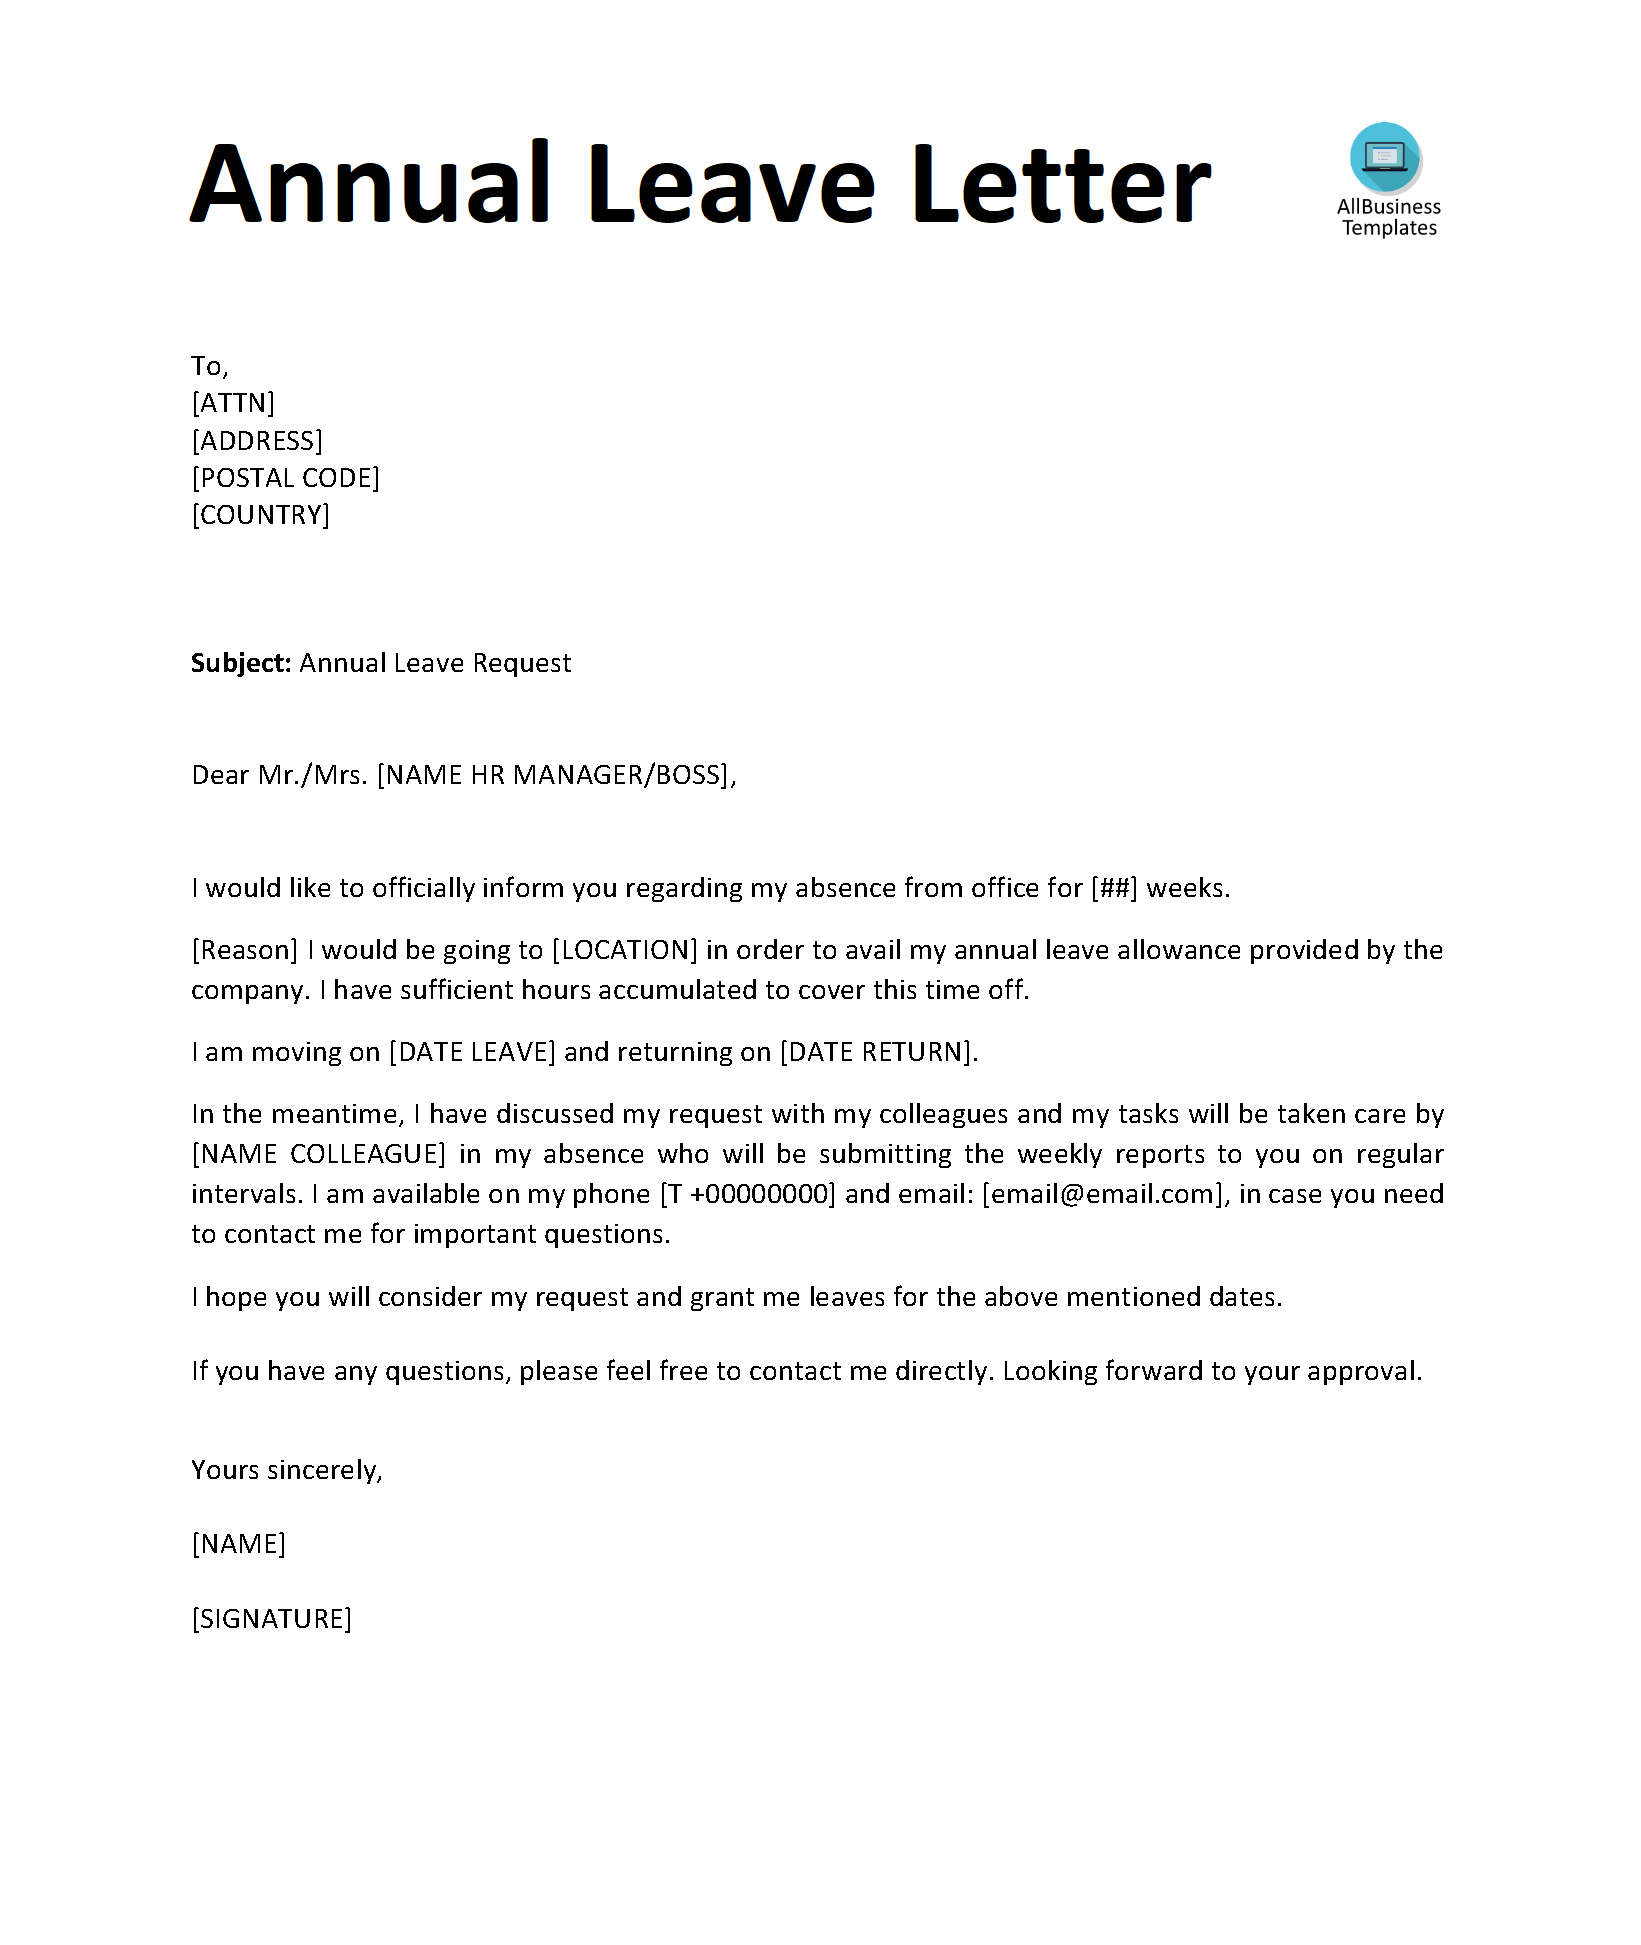 Annual Leave Letter Format